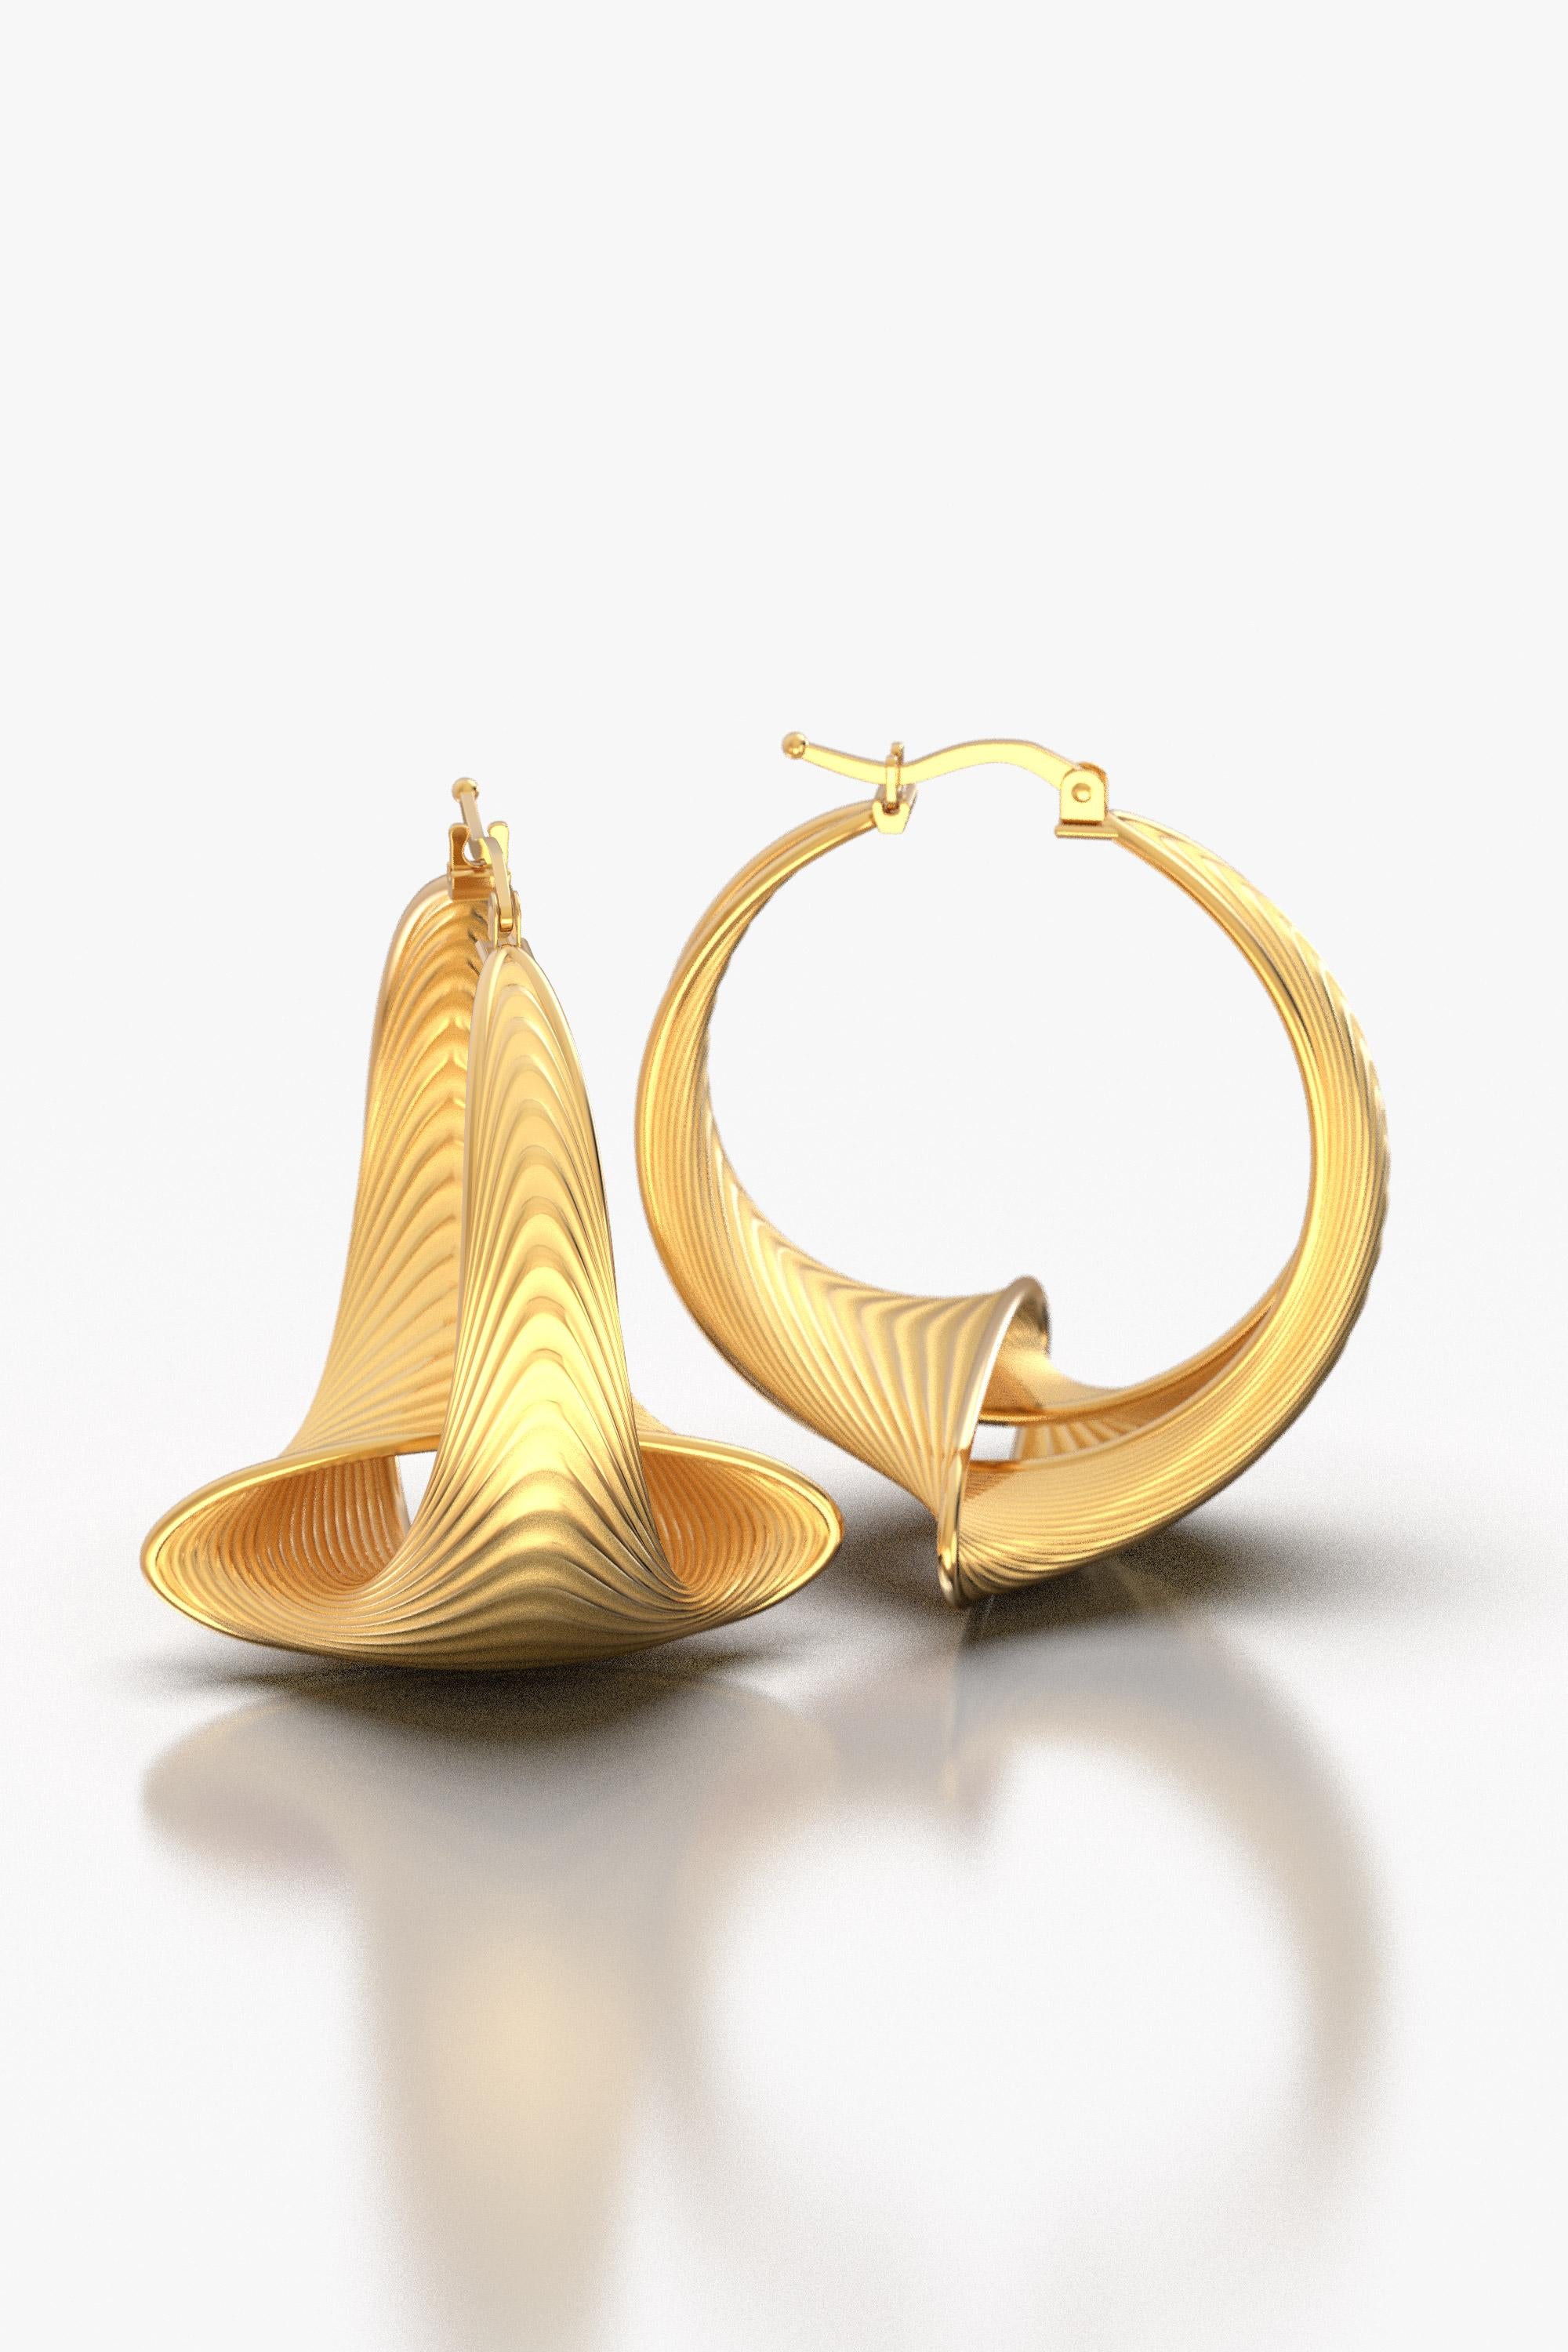  Oltremare Gioielli 14k Gold Hoop Earrings Made in Italy, Italian Fine Jewelry  For Sale 4